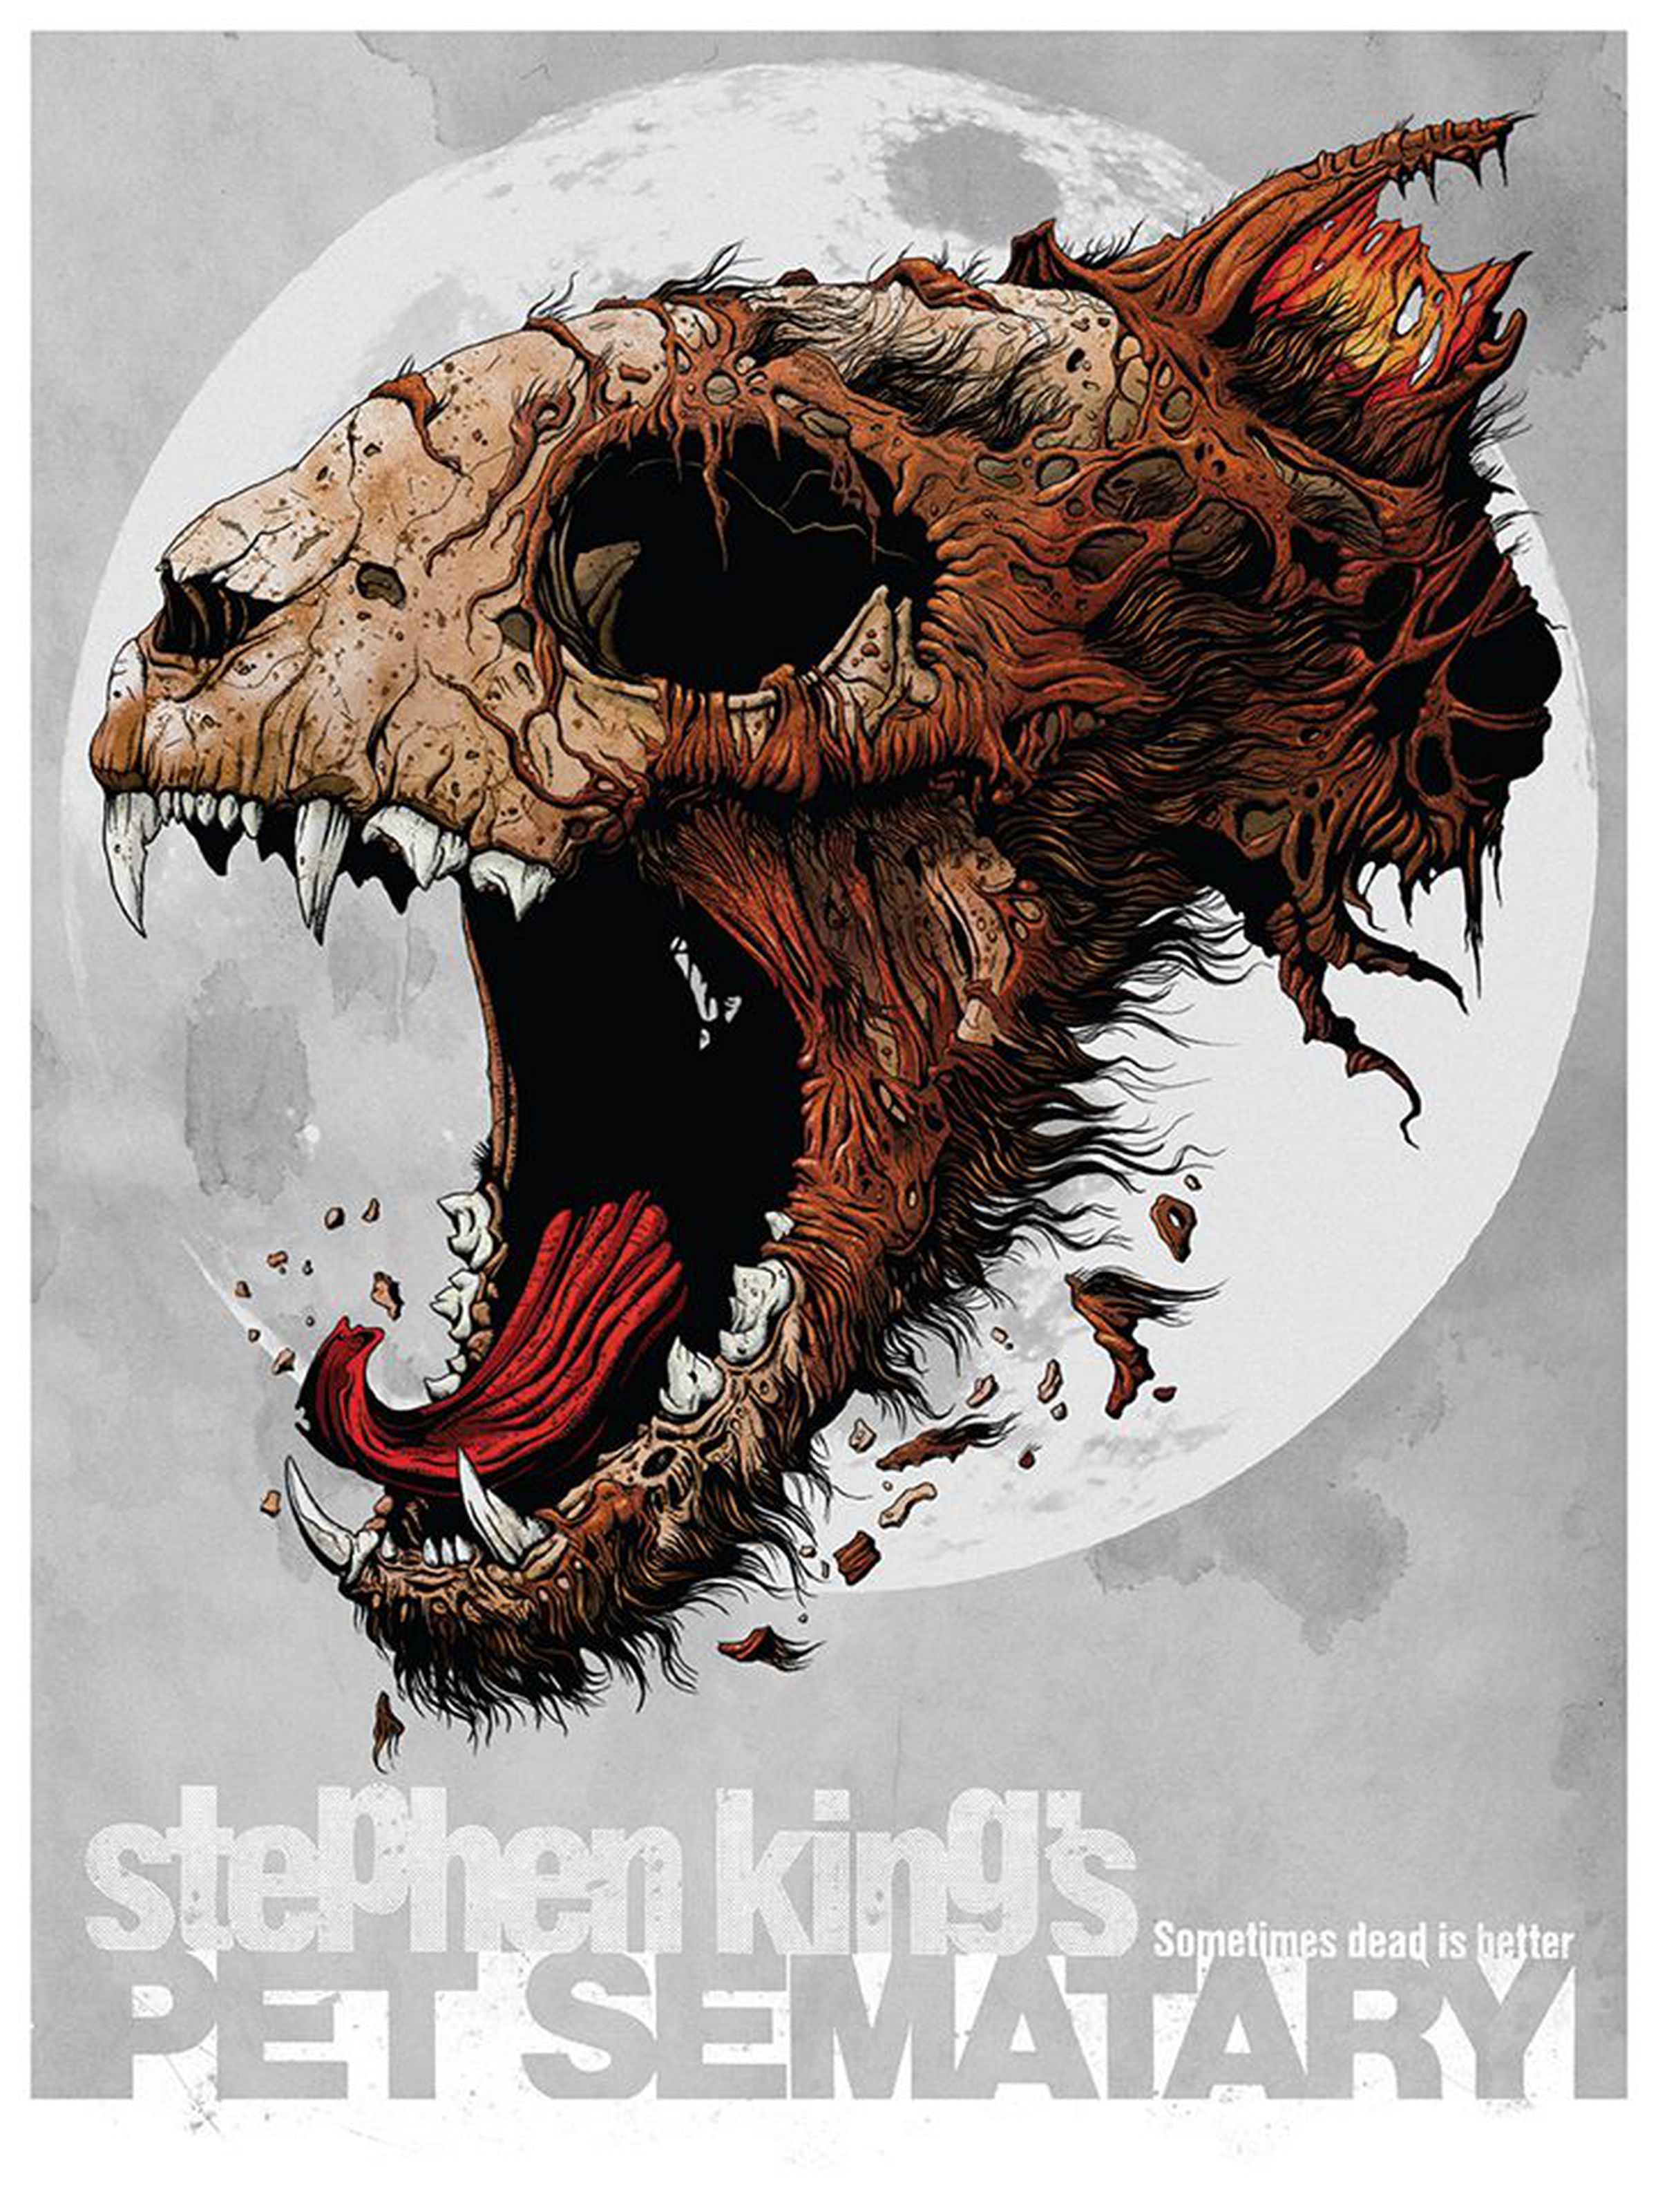 'King for a Day' Stephen King art exhibit